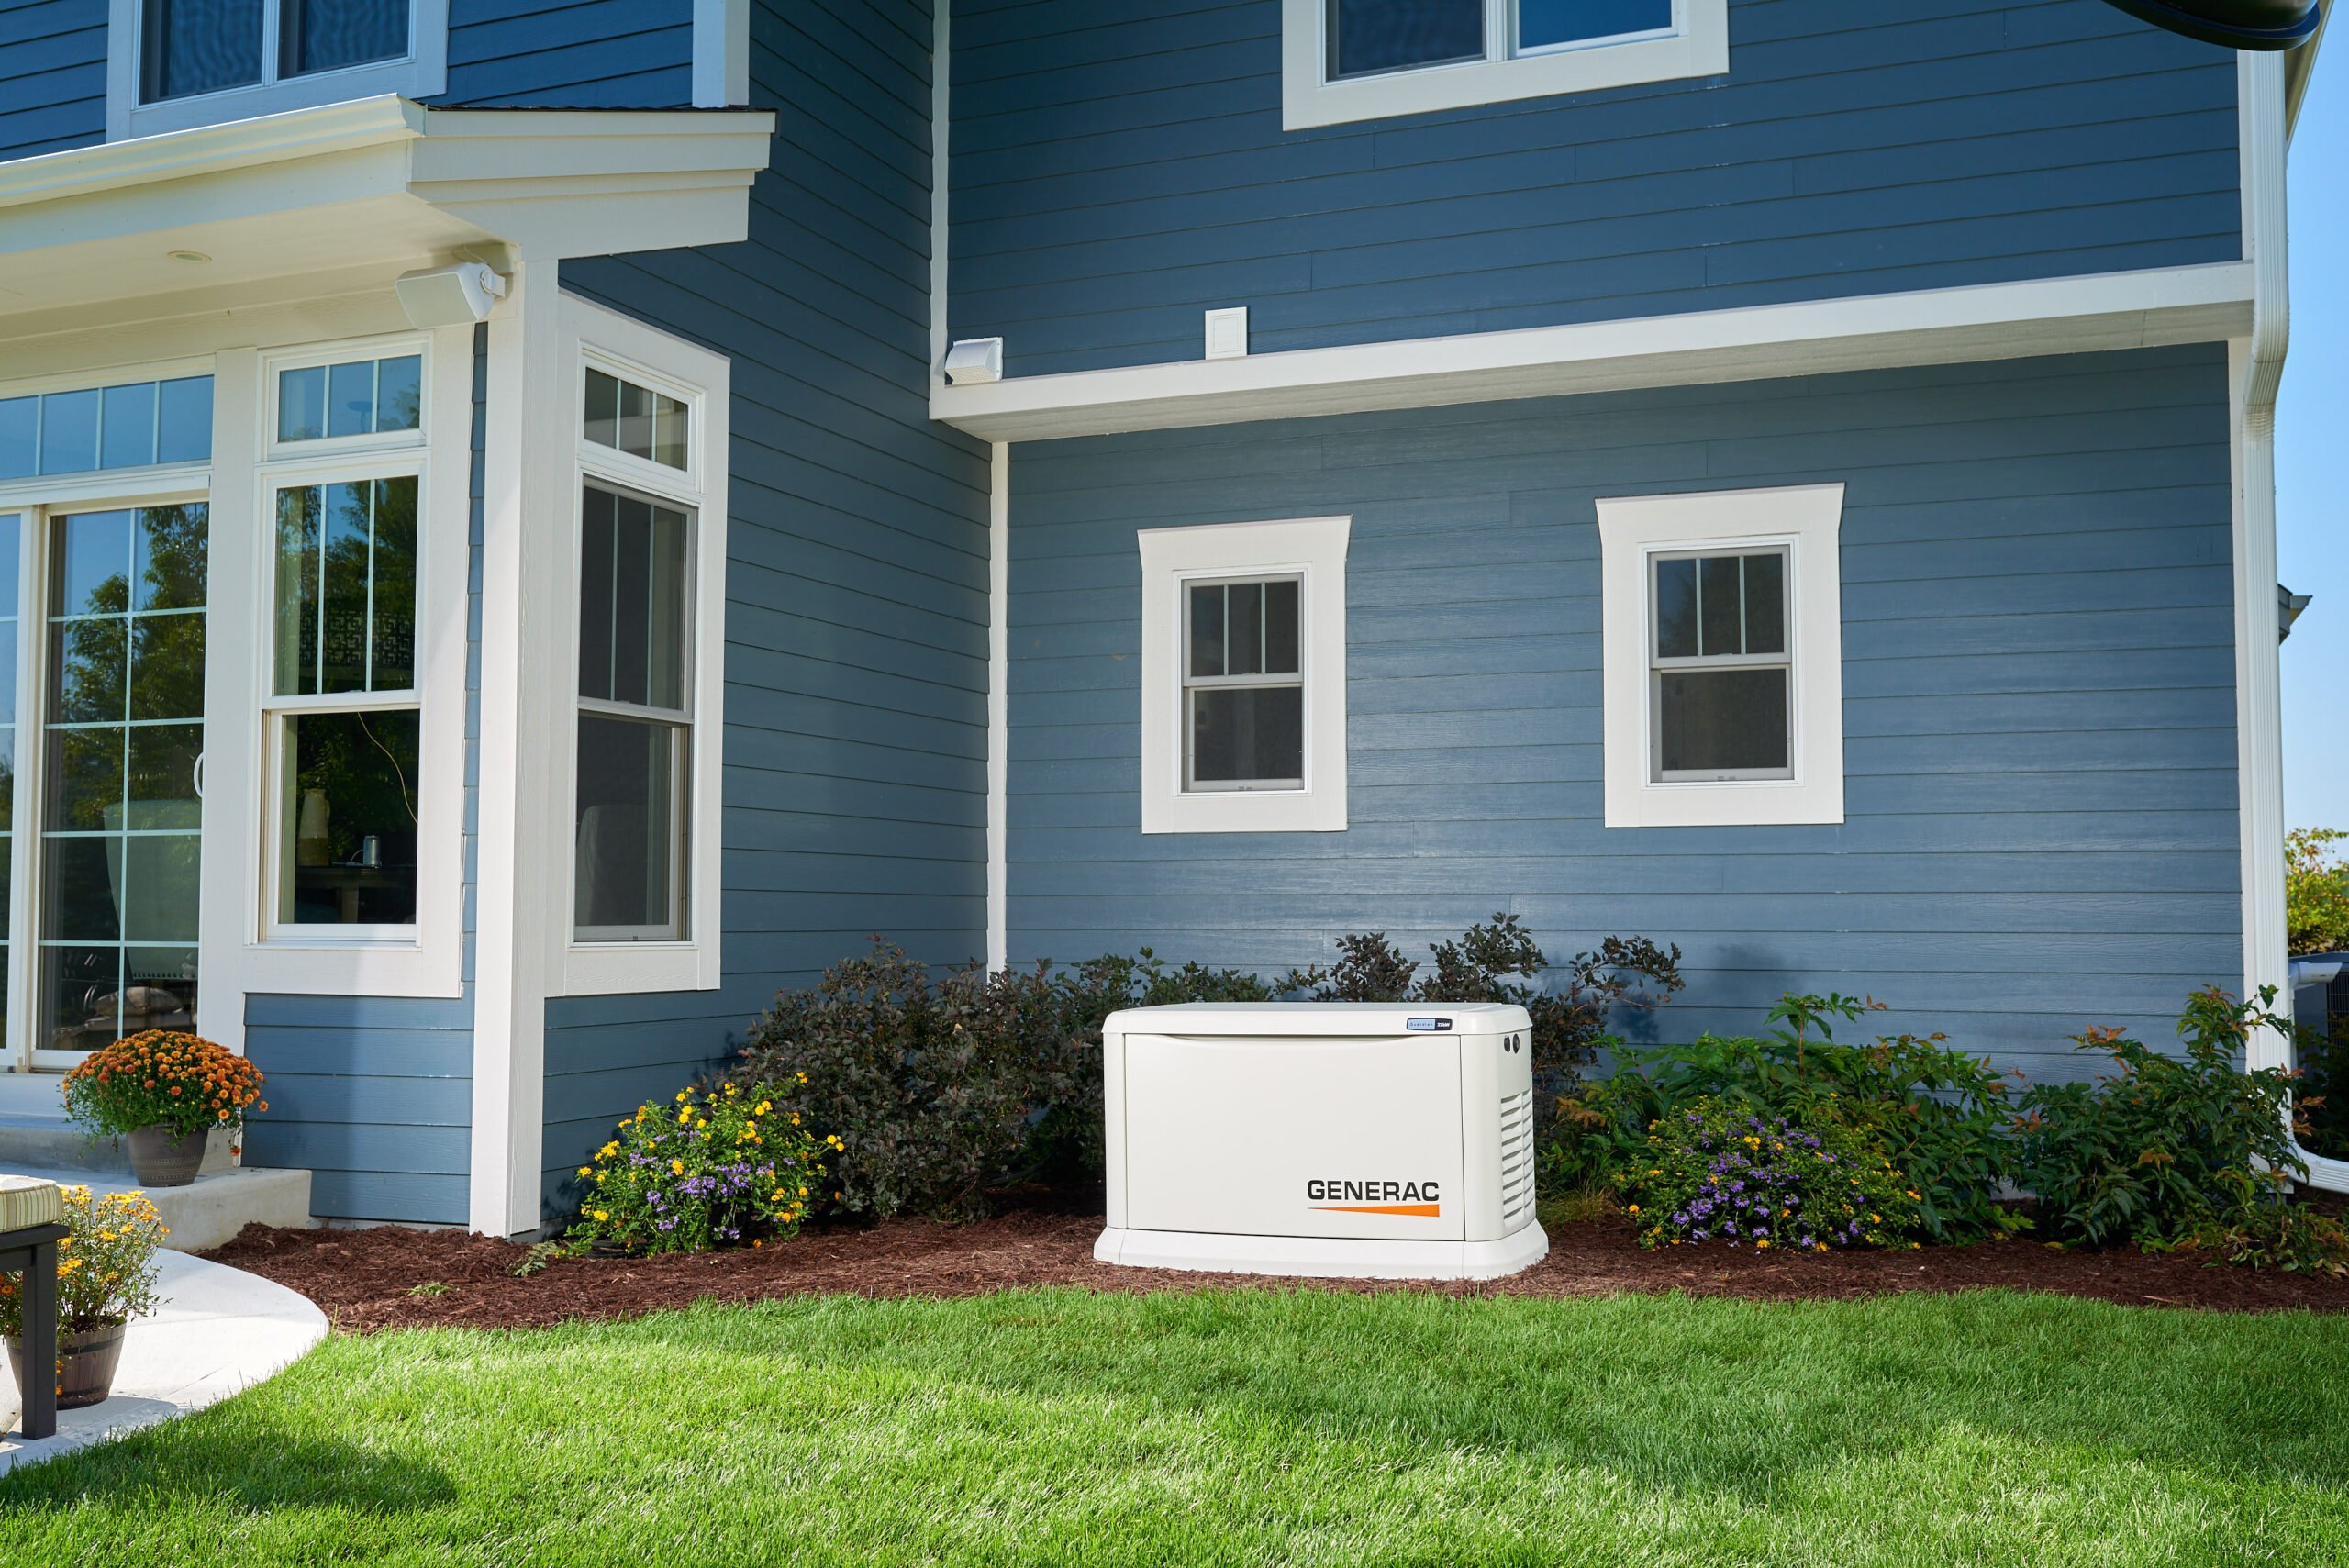 Generac generator for standby power outside a home